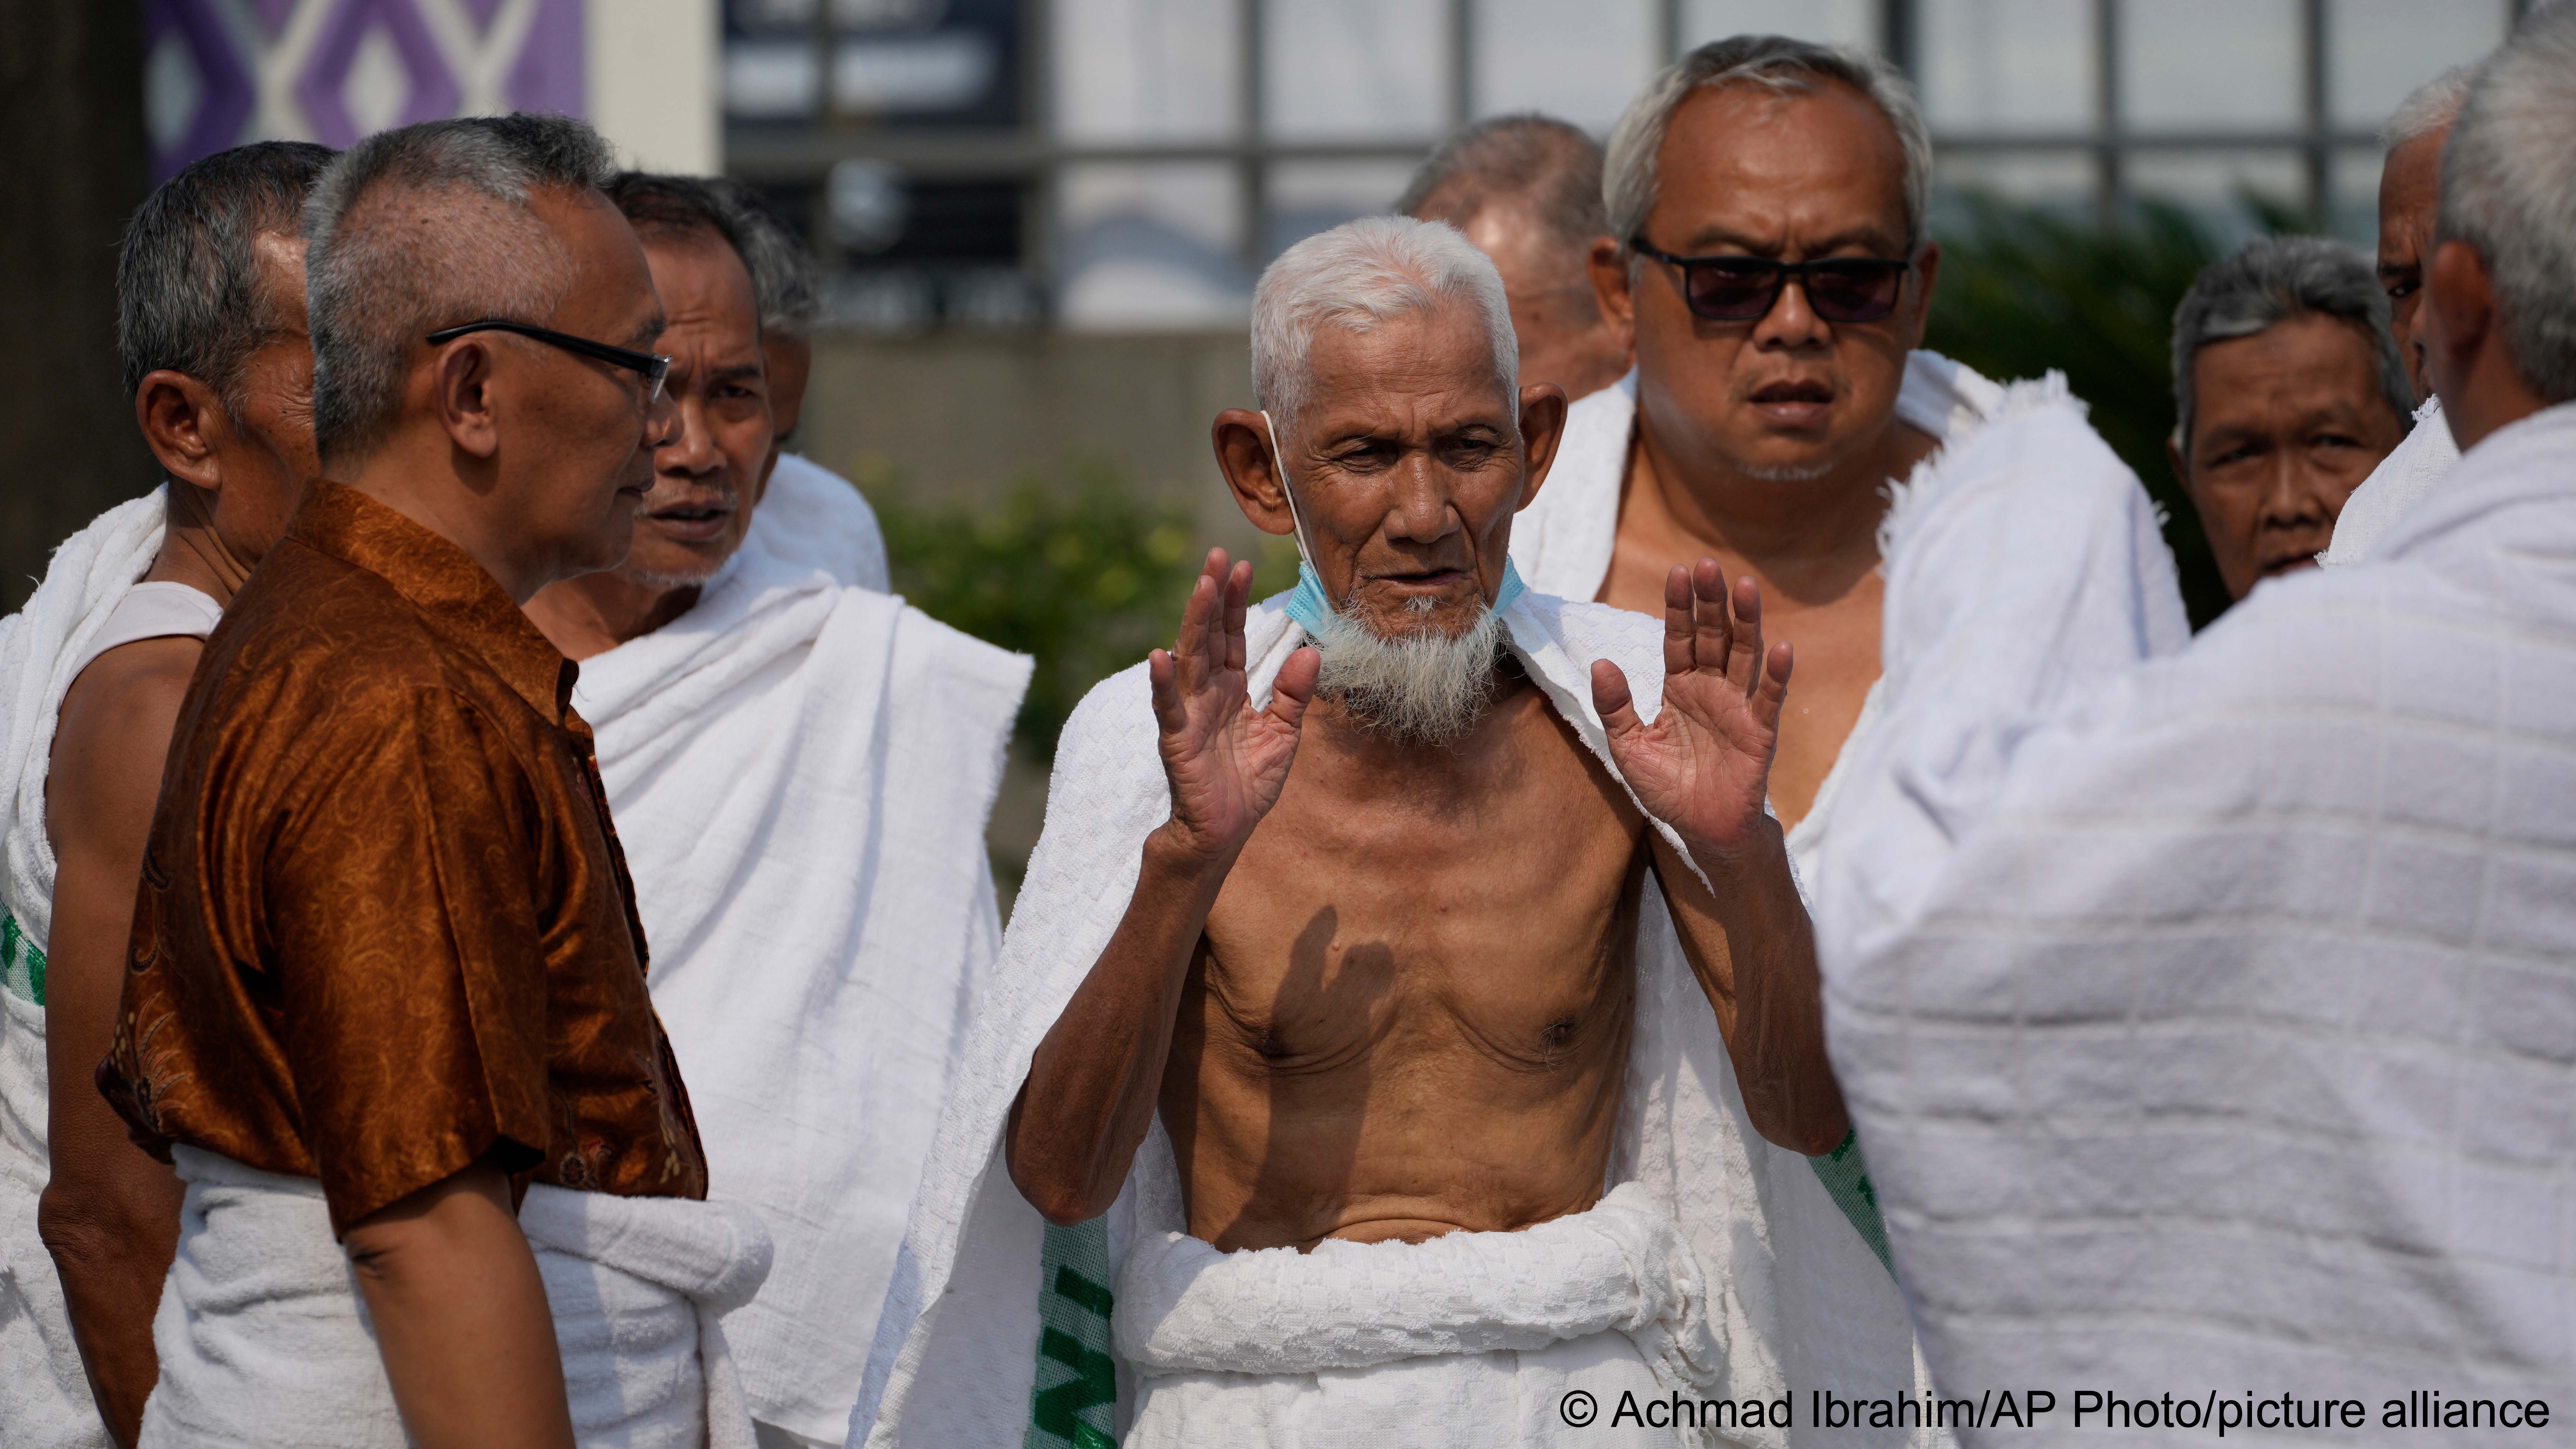 Husin bin Nisan, center, prays during a hajj rehearsal in Tangerang, Indonesia, Monday, May 15, 2023. After spending more than three decades picking tips from motorists, the 85-year-old volunteer traffic attendant is finally realizing his dream to go to the Islamic holy cities of Mecca and Medina for hajj pilgrimage (image: AP Photo/Achmad Ibrahim)